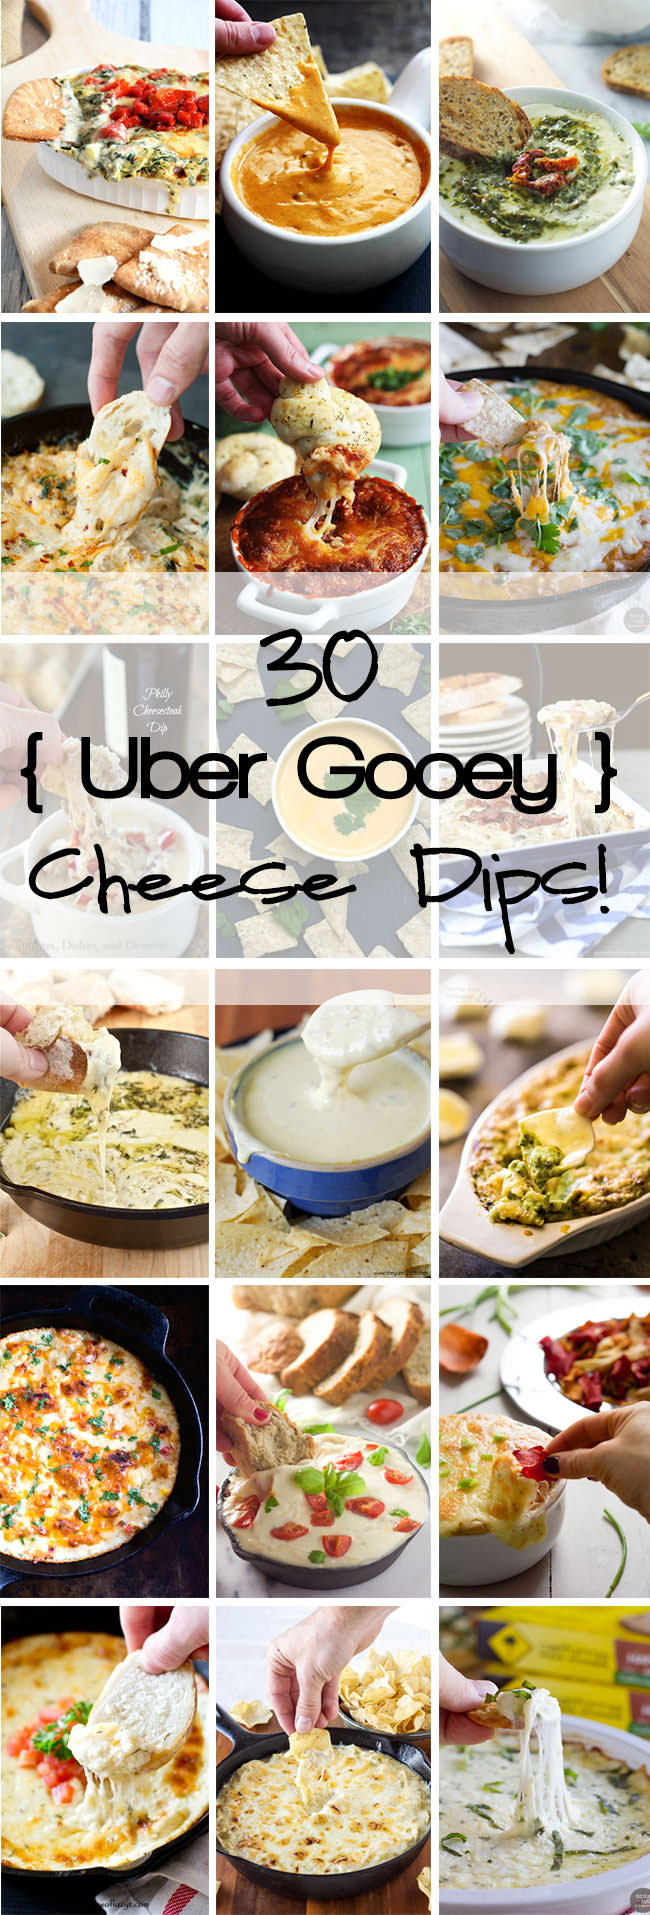 30 uber gooey cheese dips that will make your mouth water and your stomach growl!